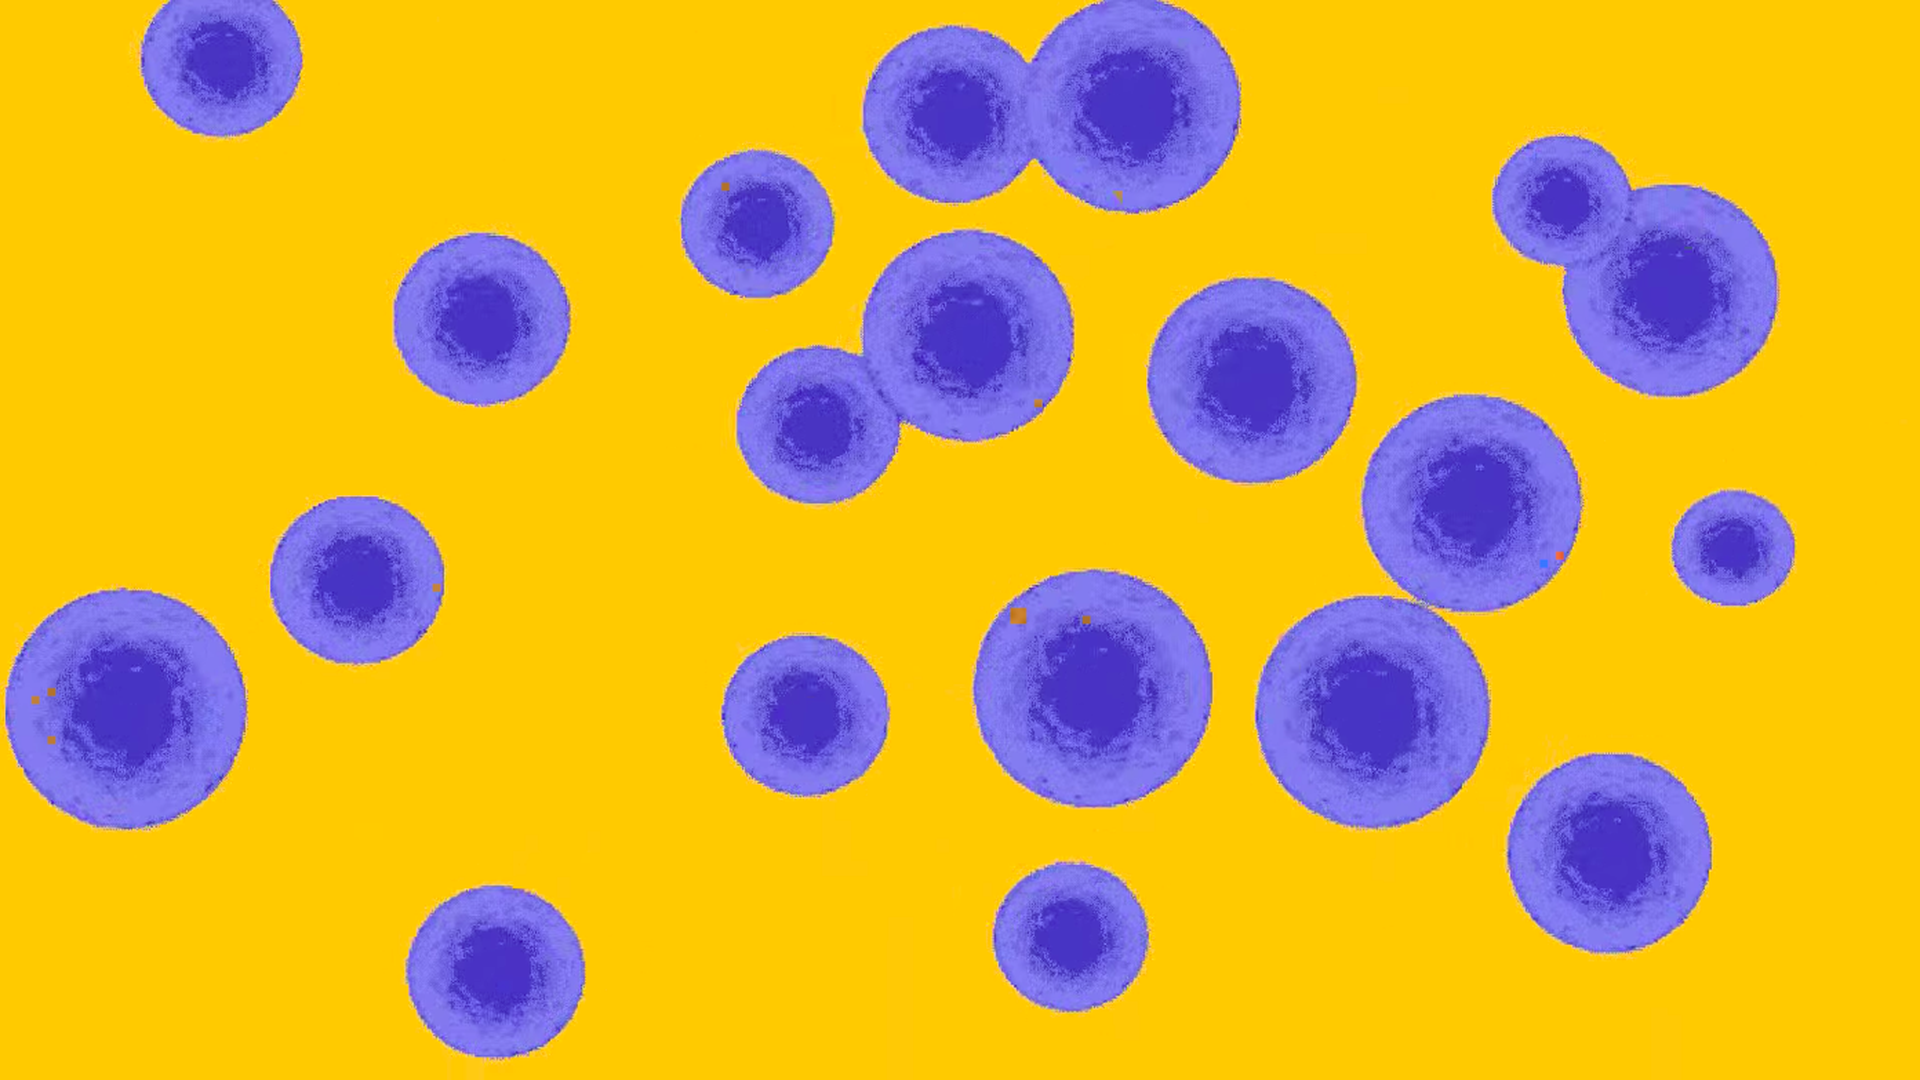 This illustration shows clusters of purple cells on a yellow background.